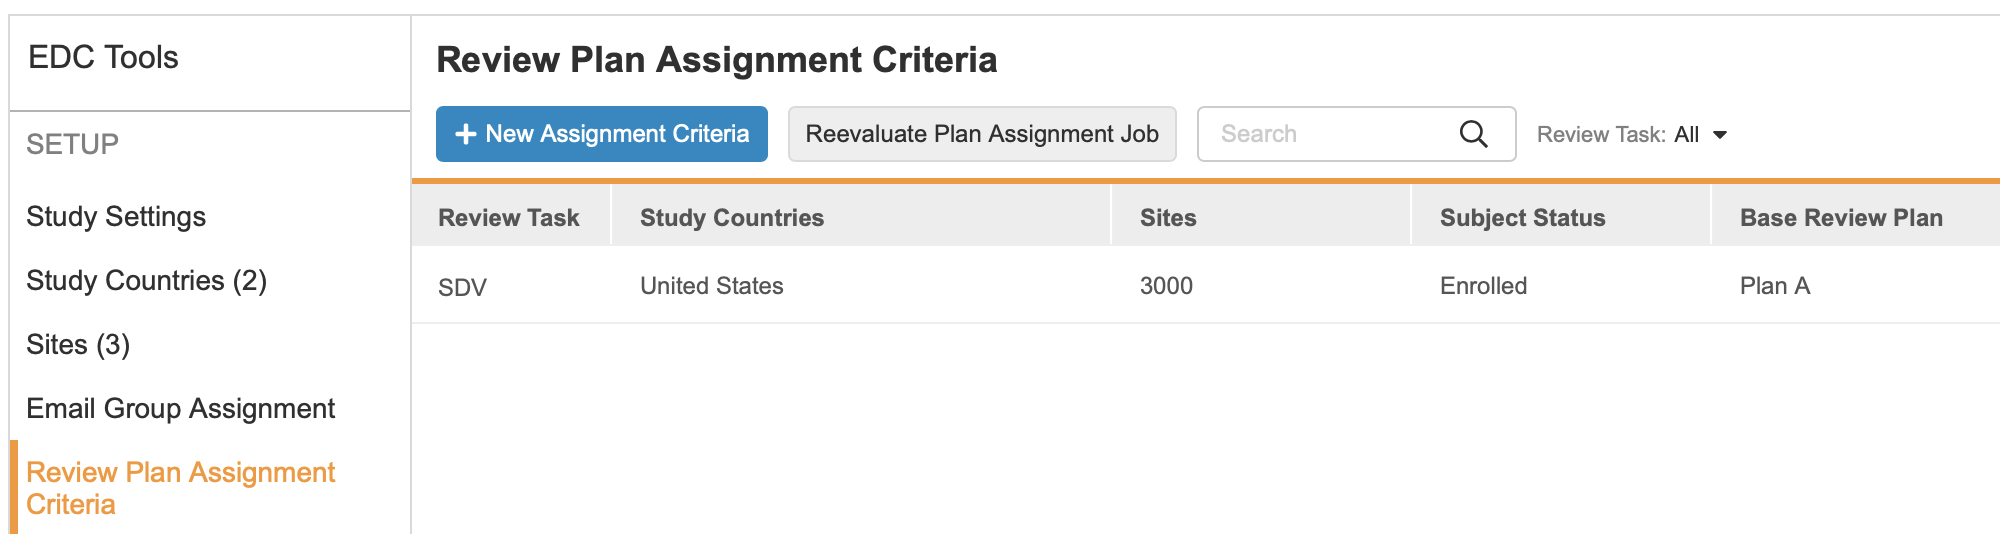 Review Plan Assignments in EDC Tools